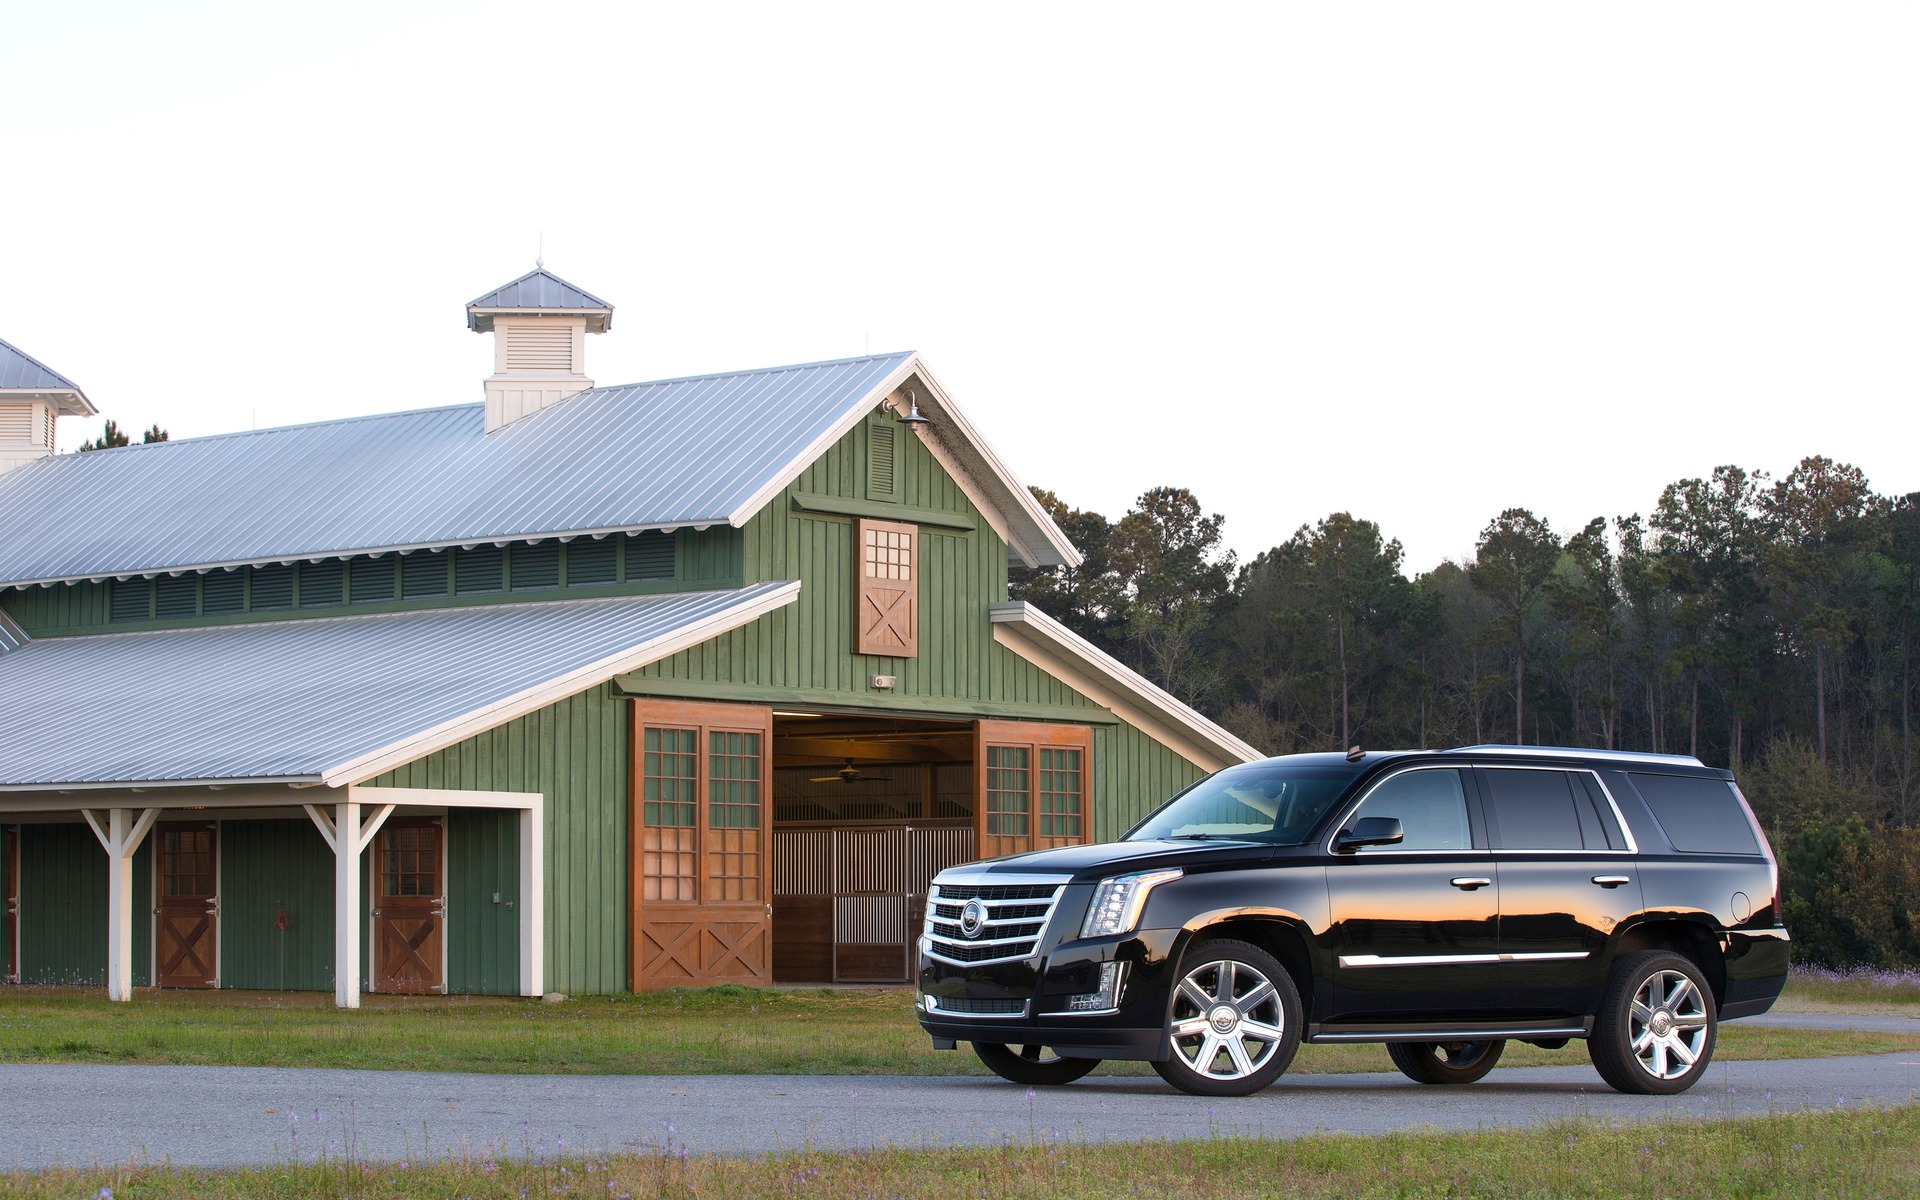 The Escalade offers something few, if any, of its competitors can claim.